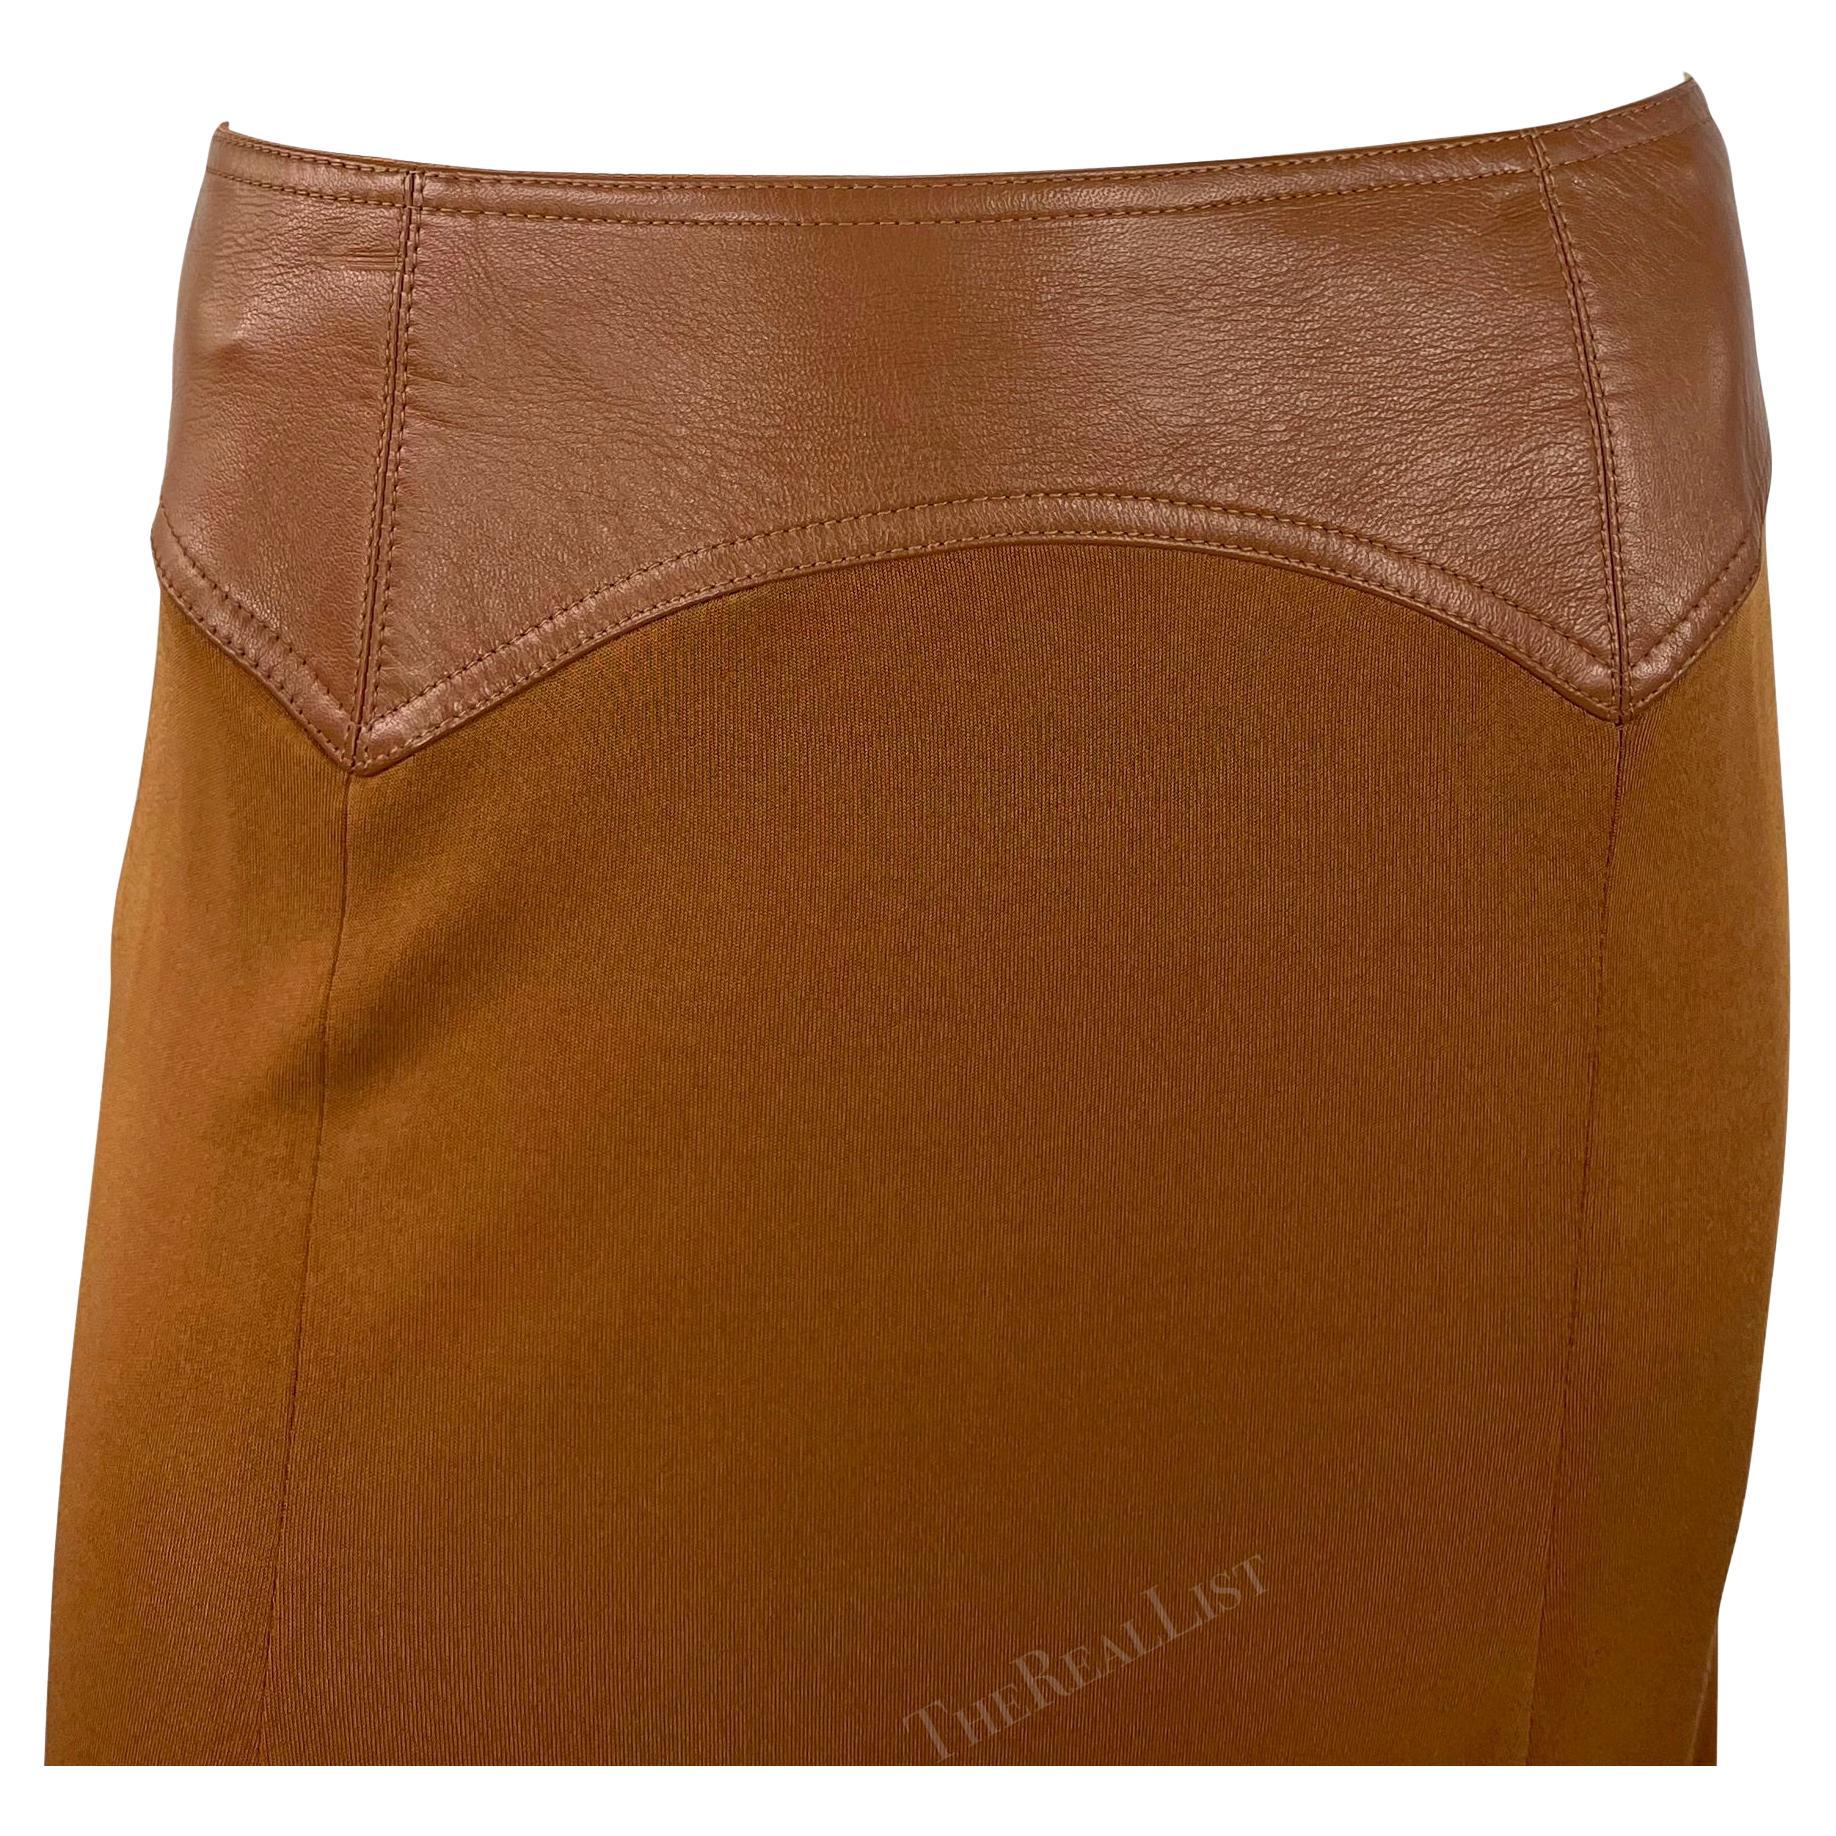 F/W 2001 Gianni Versace by Donatella Light Saddle Brown Leather Bodycon Skirt In Excellent Condition For Sale In West Hollywood, CA